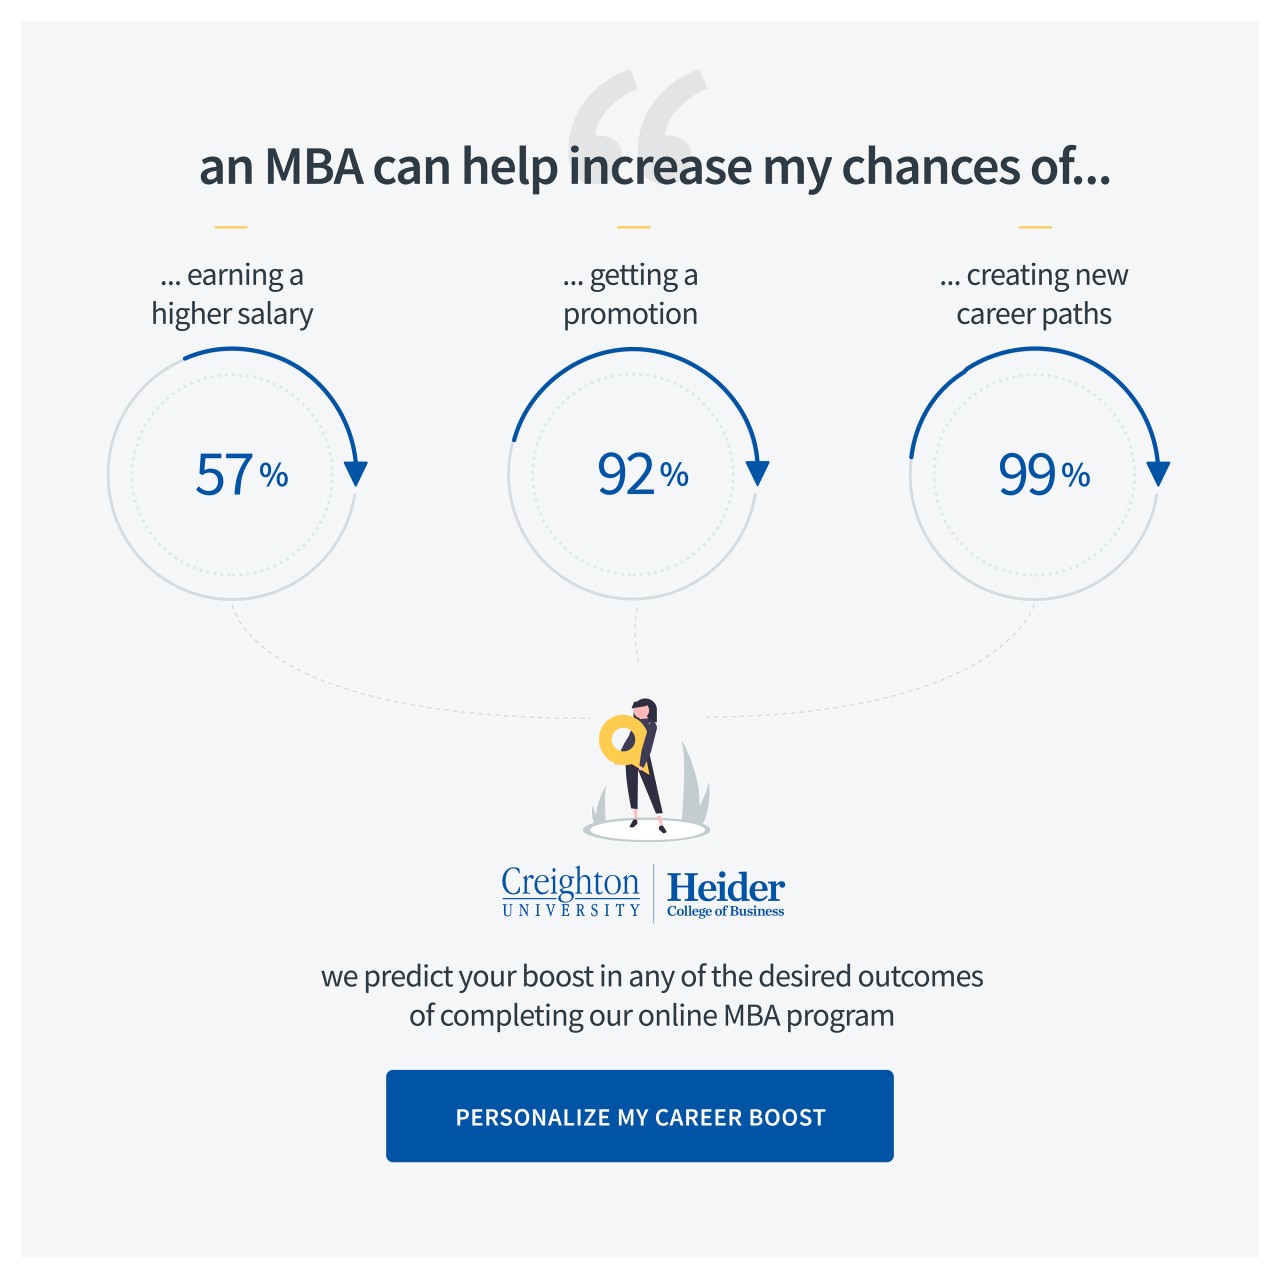 An MBA can help increase my chances of earning a higher salary, getting a promotion, creating new career paths. Click to learn more.